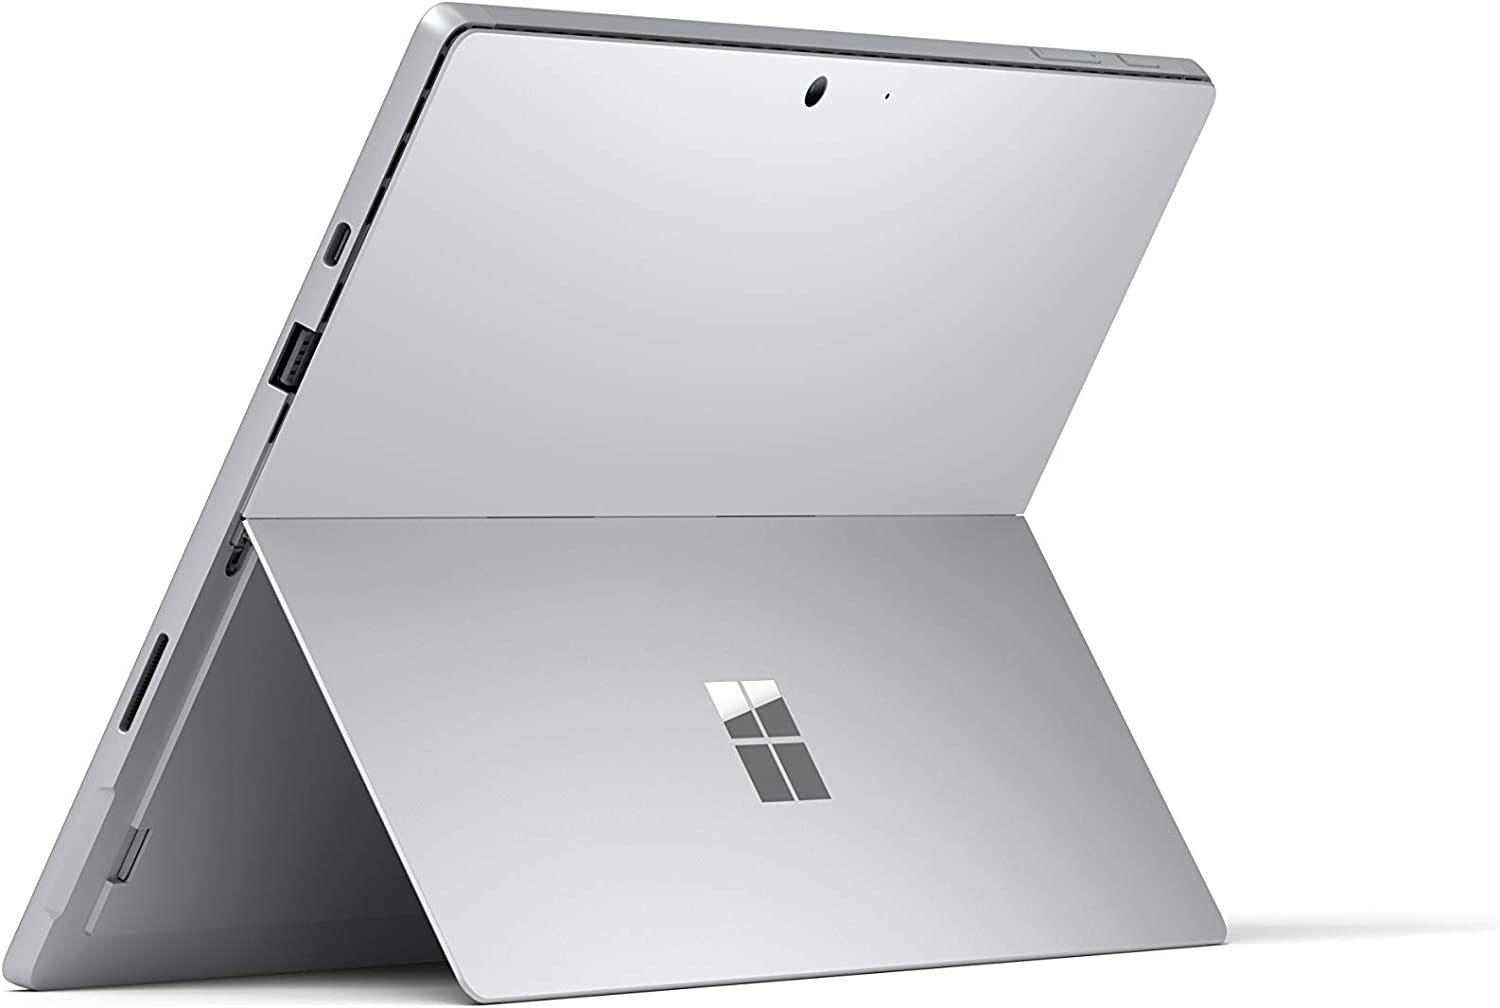 Microsoft - Surface Pro 7+ in stand posotoin